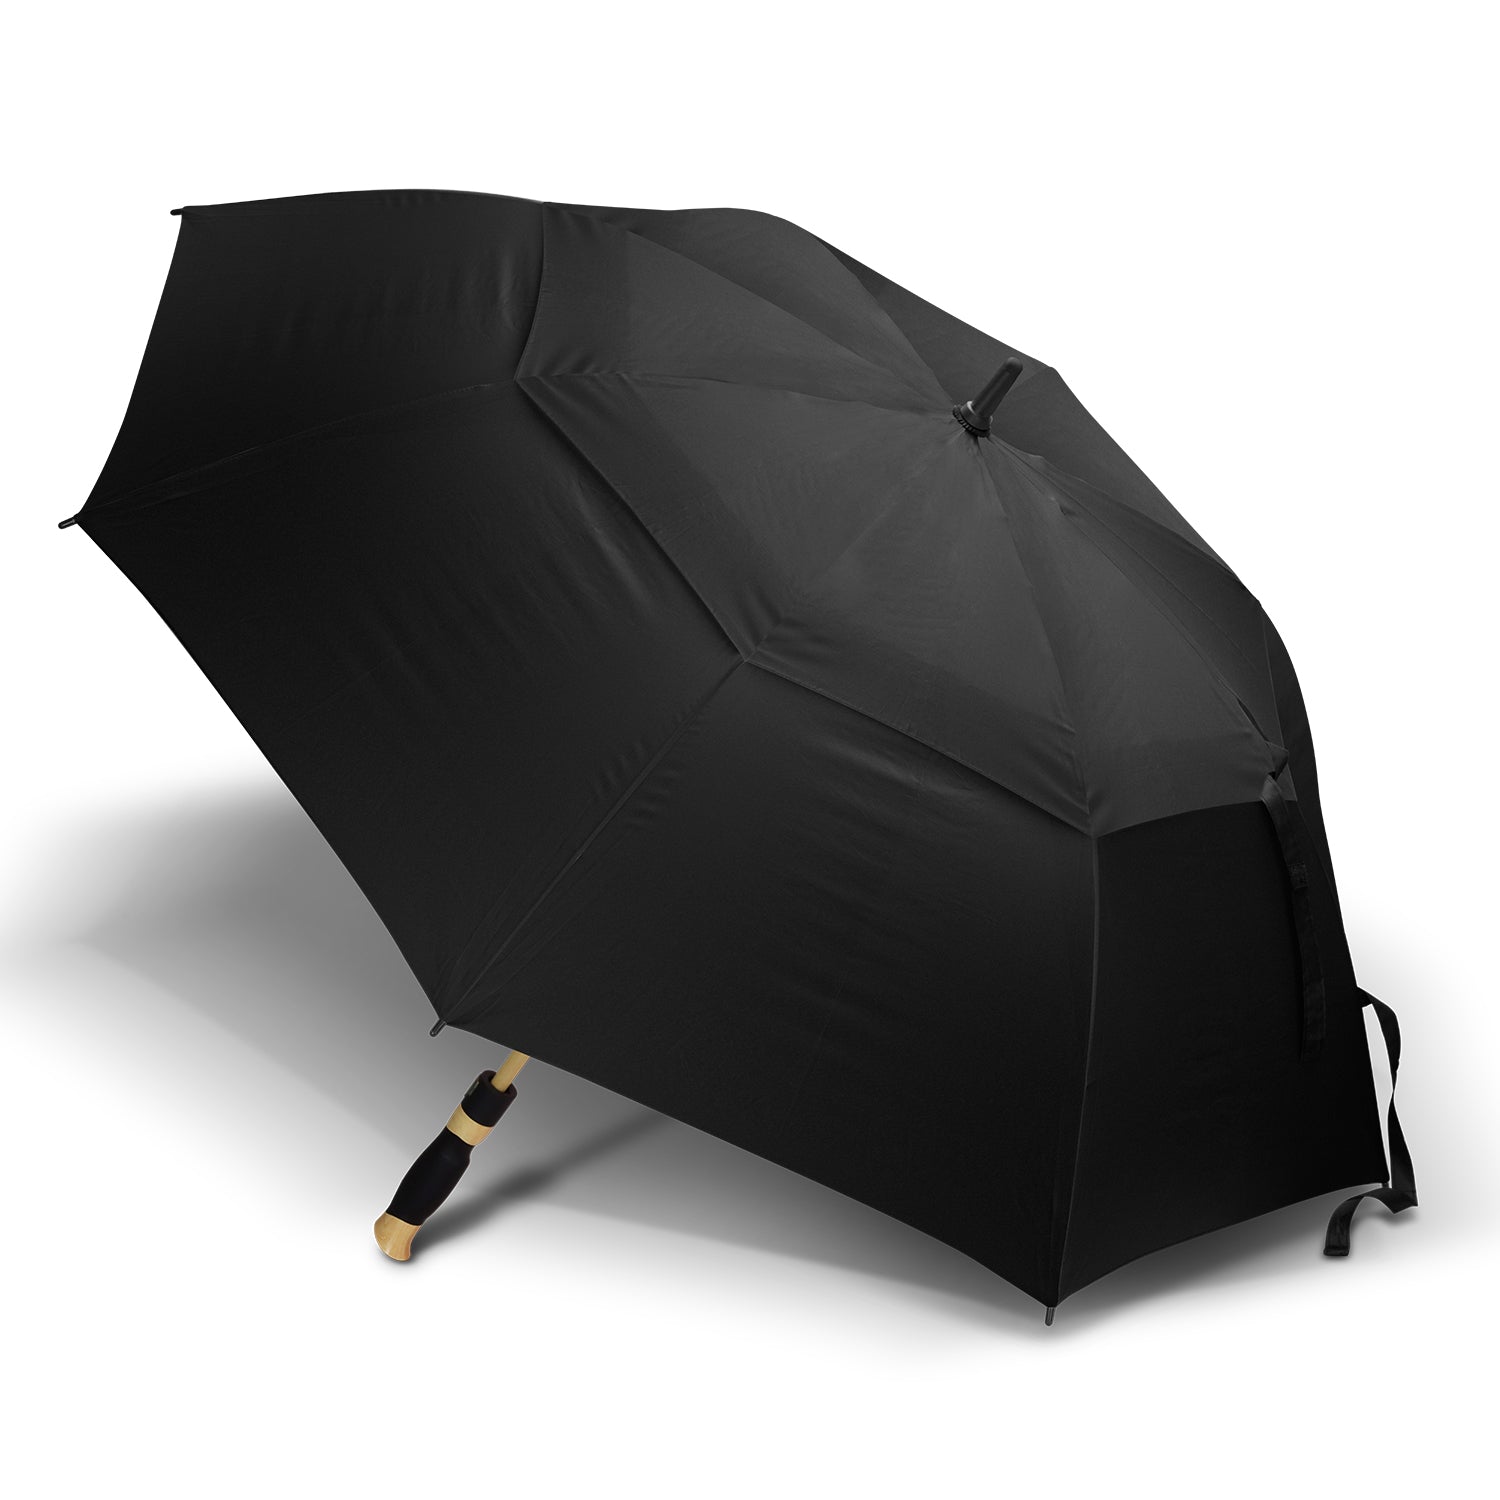 STORMPROOF CYCLONE XL®️ - Heavy Duty Storm Umbrella With Double Layer Wind Vent System, Wind Proof Fibreglass Frame - Auto-Open Push Button Feature